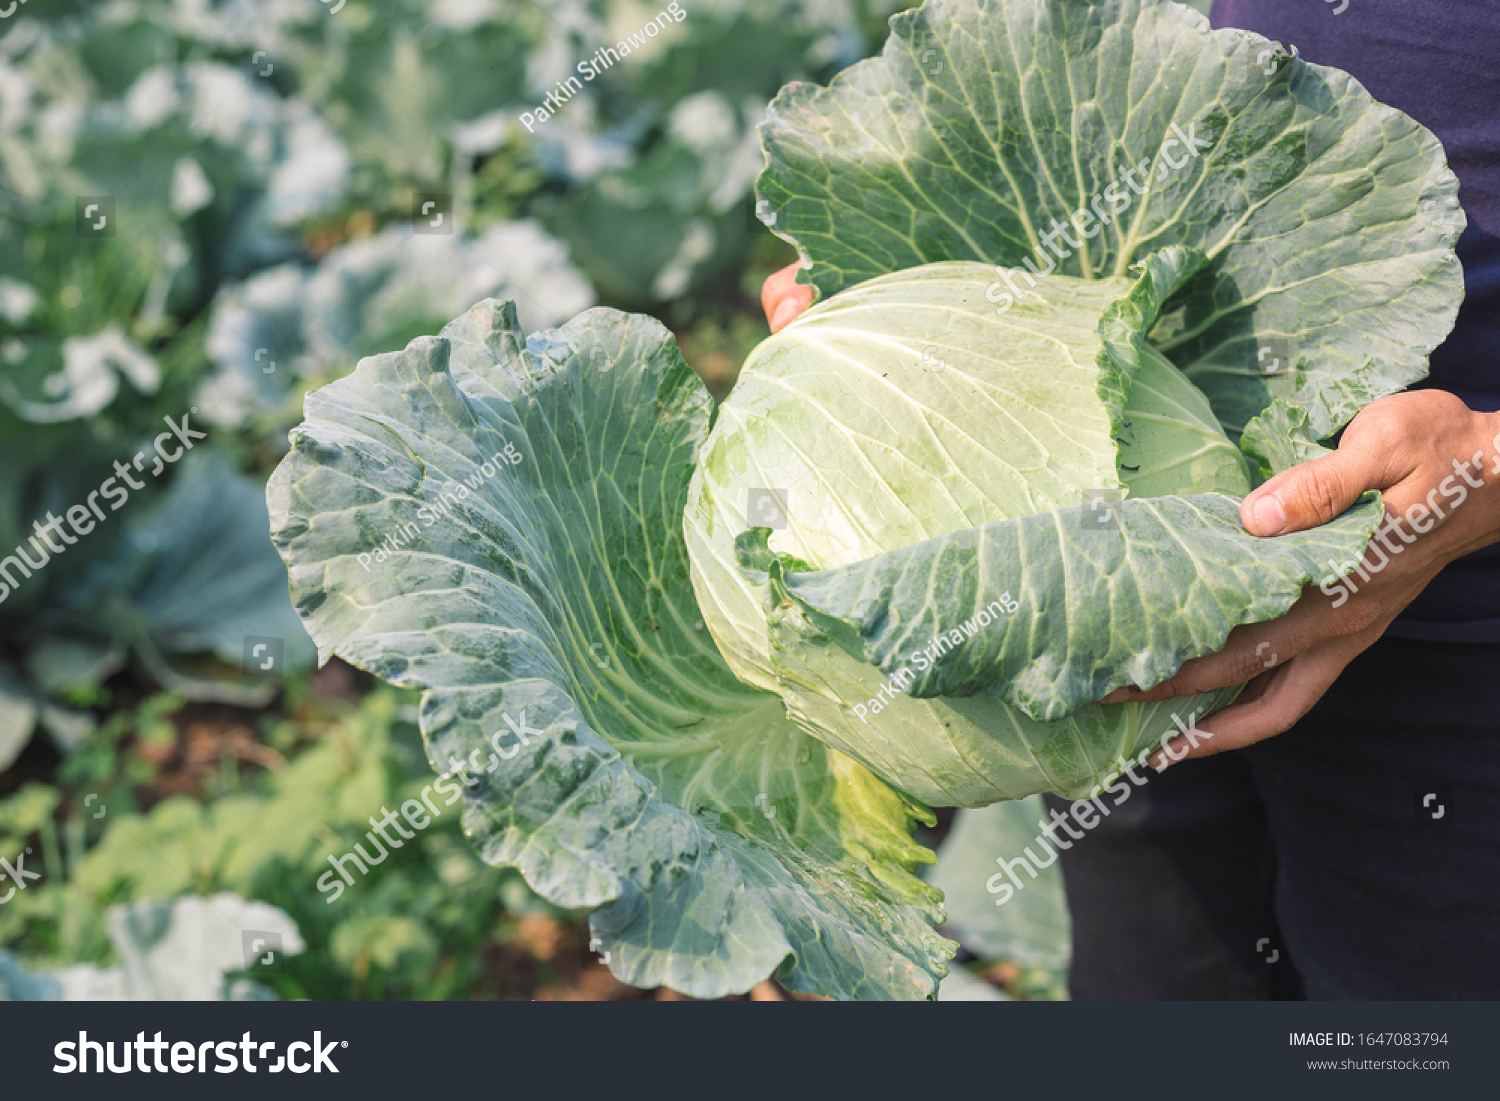 harvesting cabbage. in the hands of green cabbage. Fresh cabbage from farm field. View of green cabbages plants. Vegetarian food concept.Fresh green cabbage maturing heads growing in vegetable farm. #1647083794